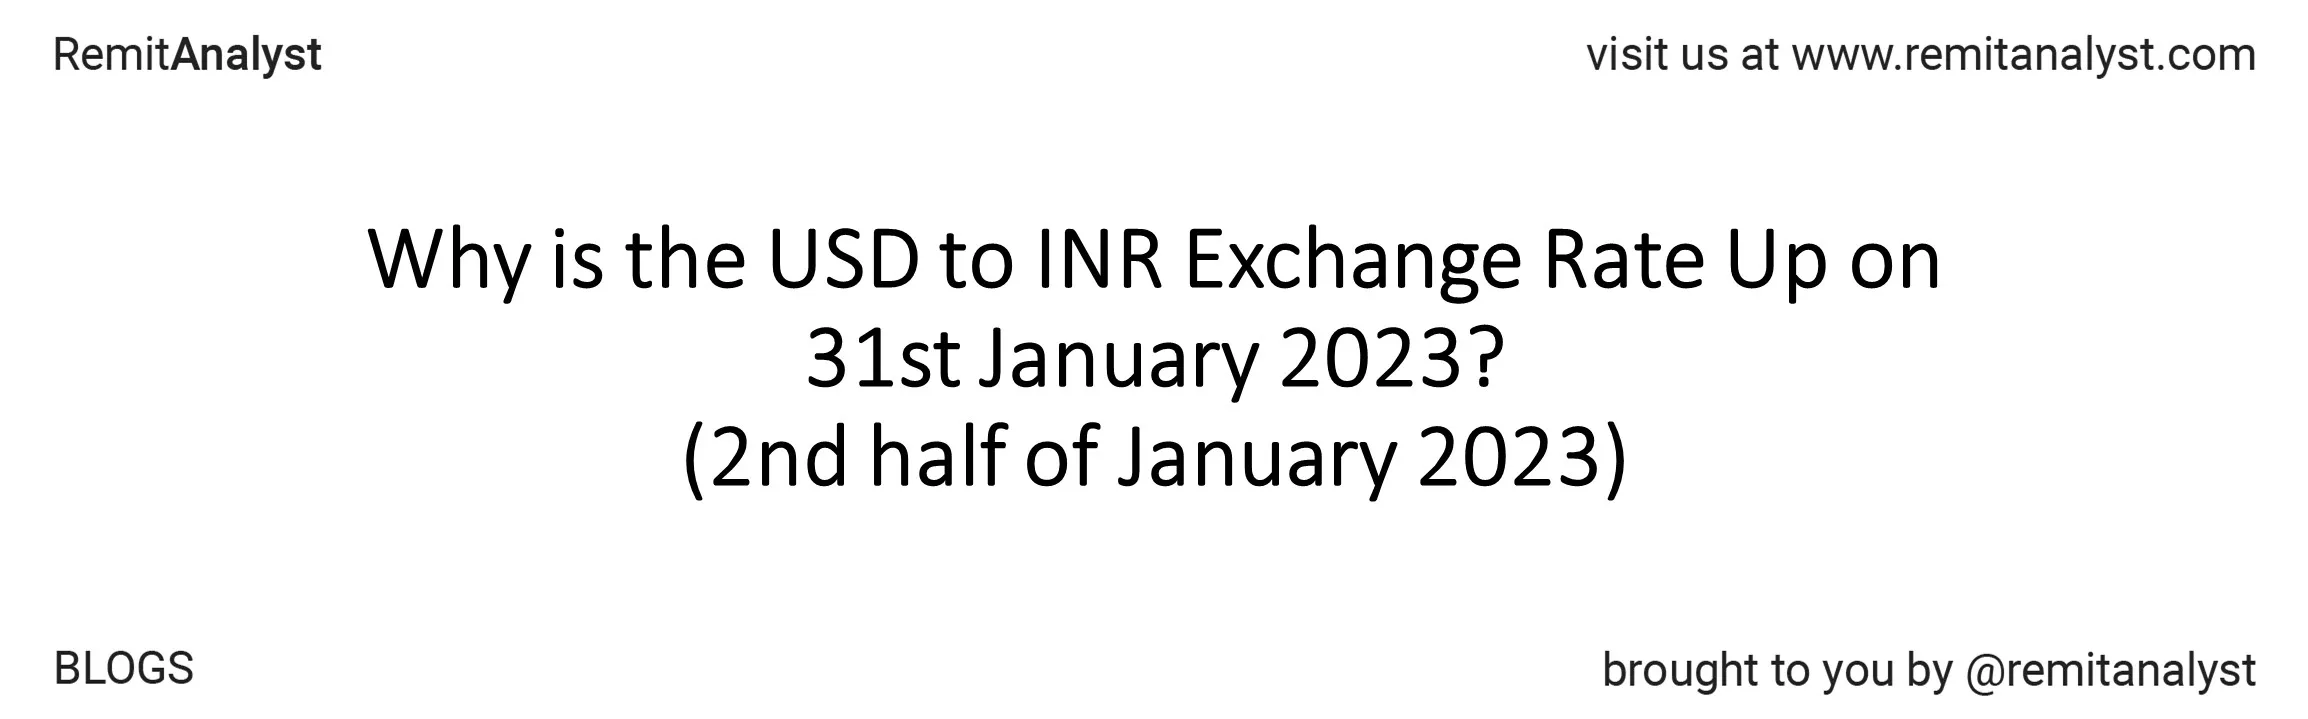 usd-to-inr-exchange-rate-16-jan-2023-to-31-jan-2023-title